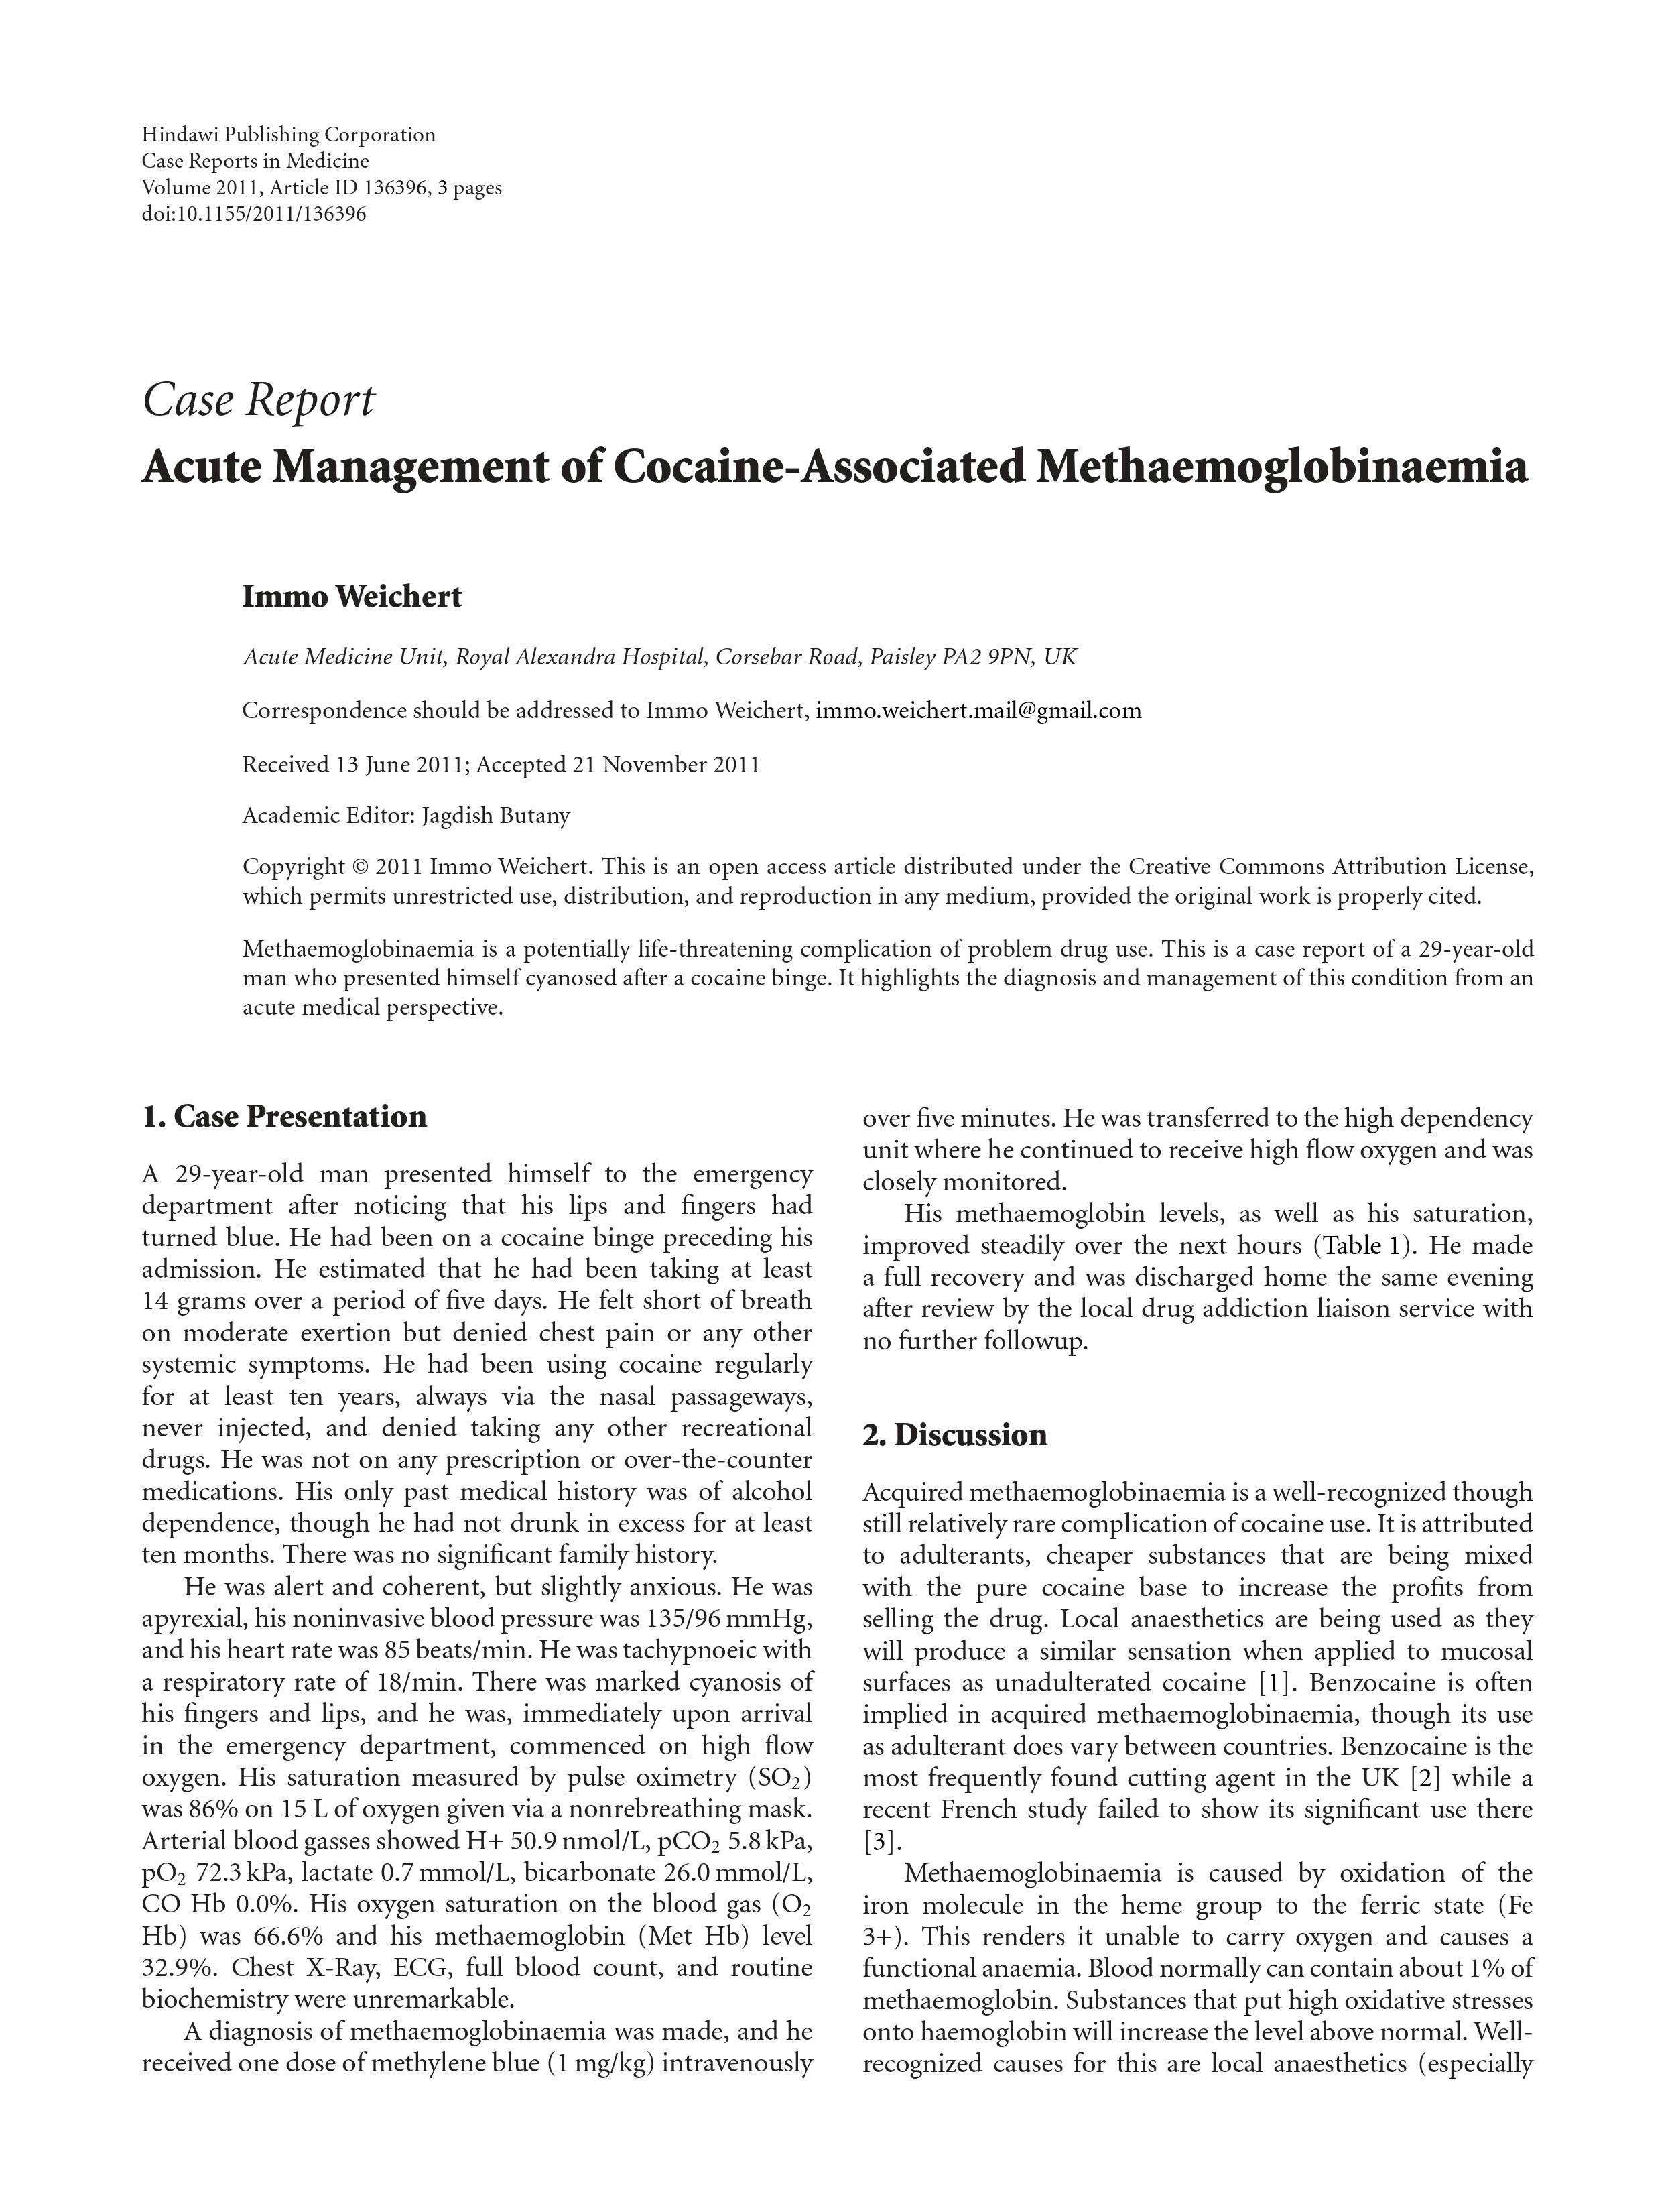 Immo Weichert, Acute Management of Cocaine-Associated Methaemoglobinaemia, Case Reports in Medicine, vol. 2011, Article ID 136396, 3 pages, 2011. doi:10.1155/2011/136396